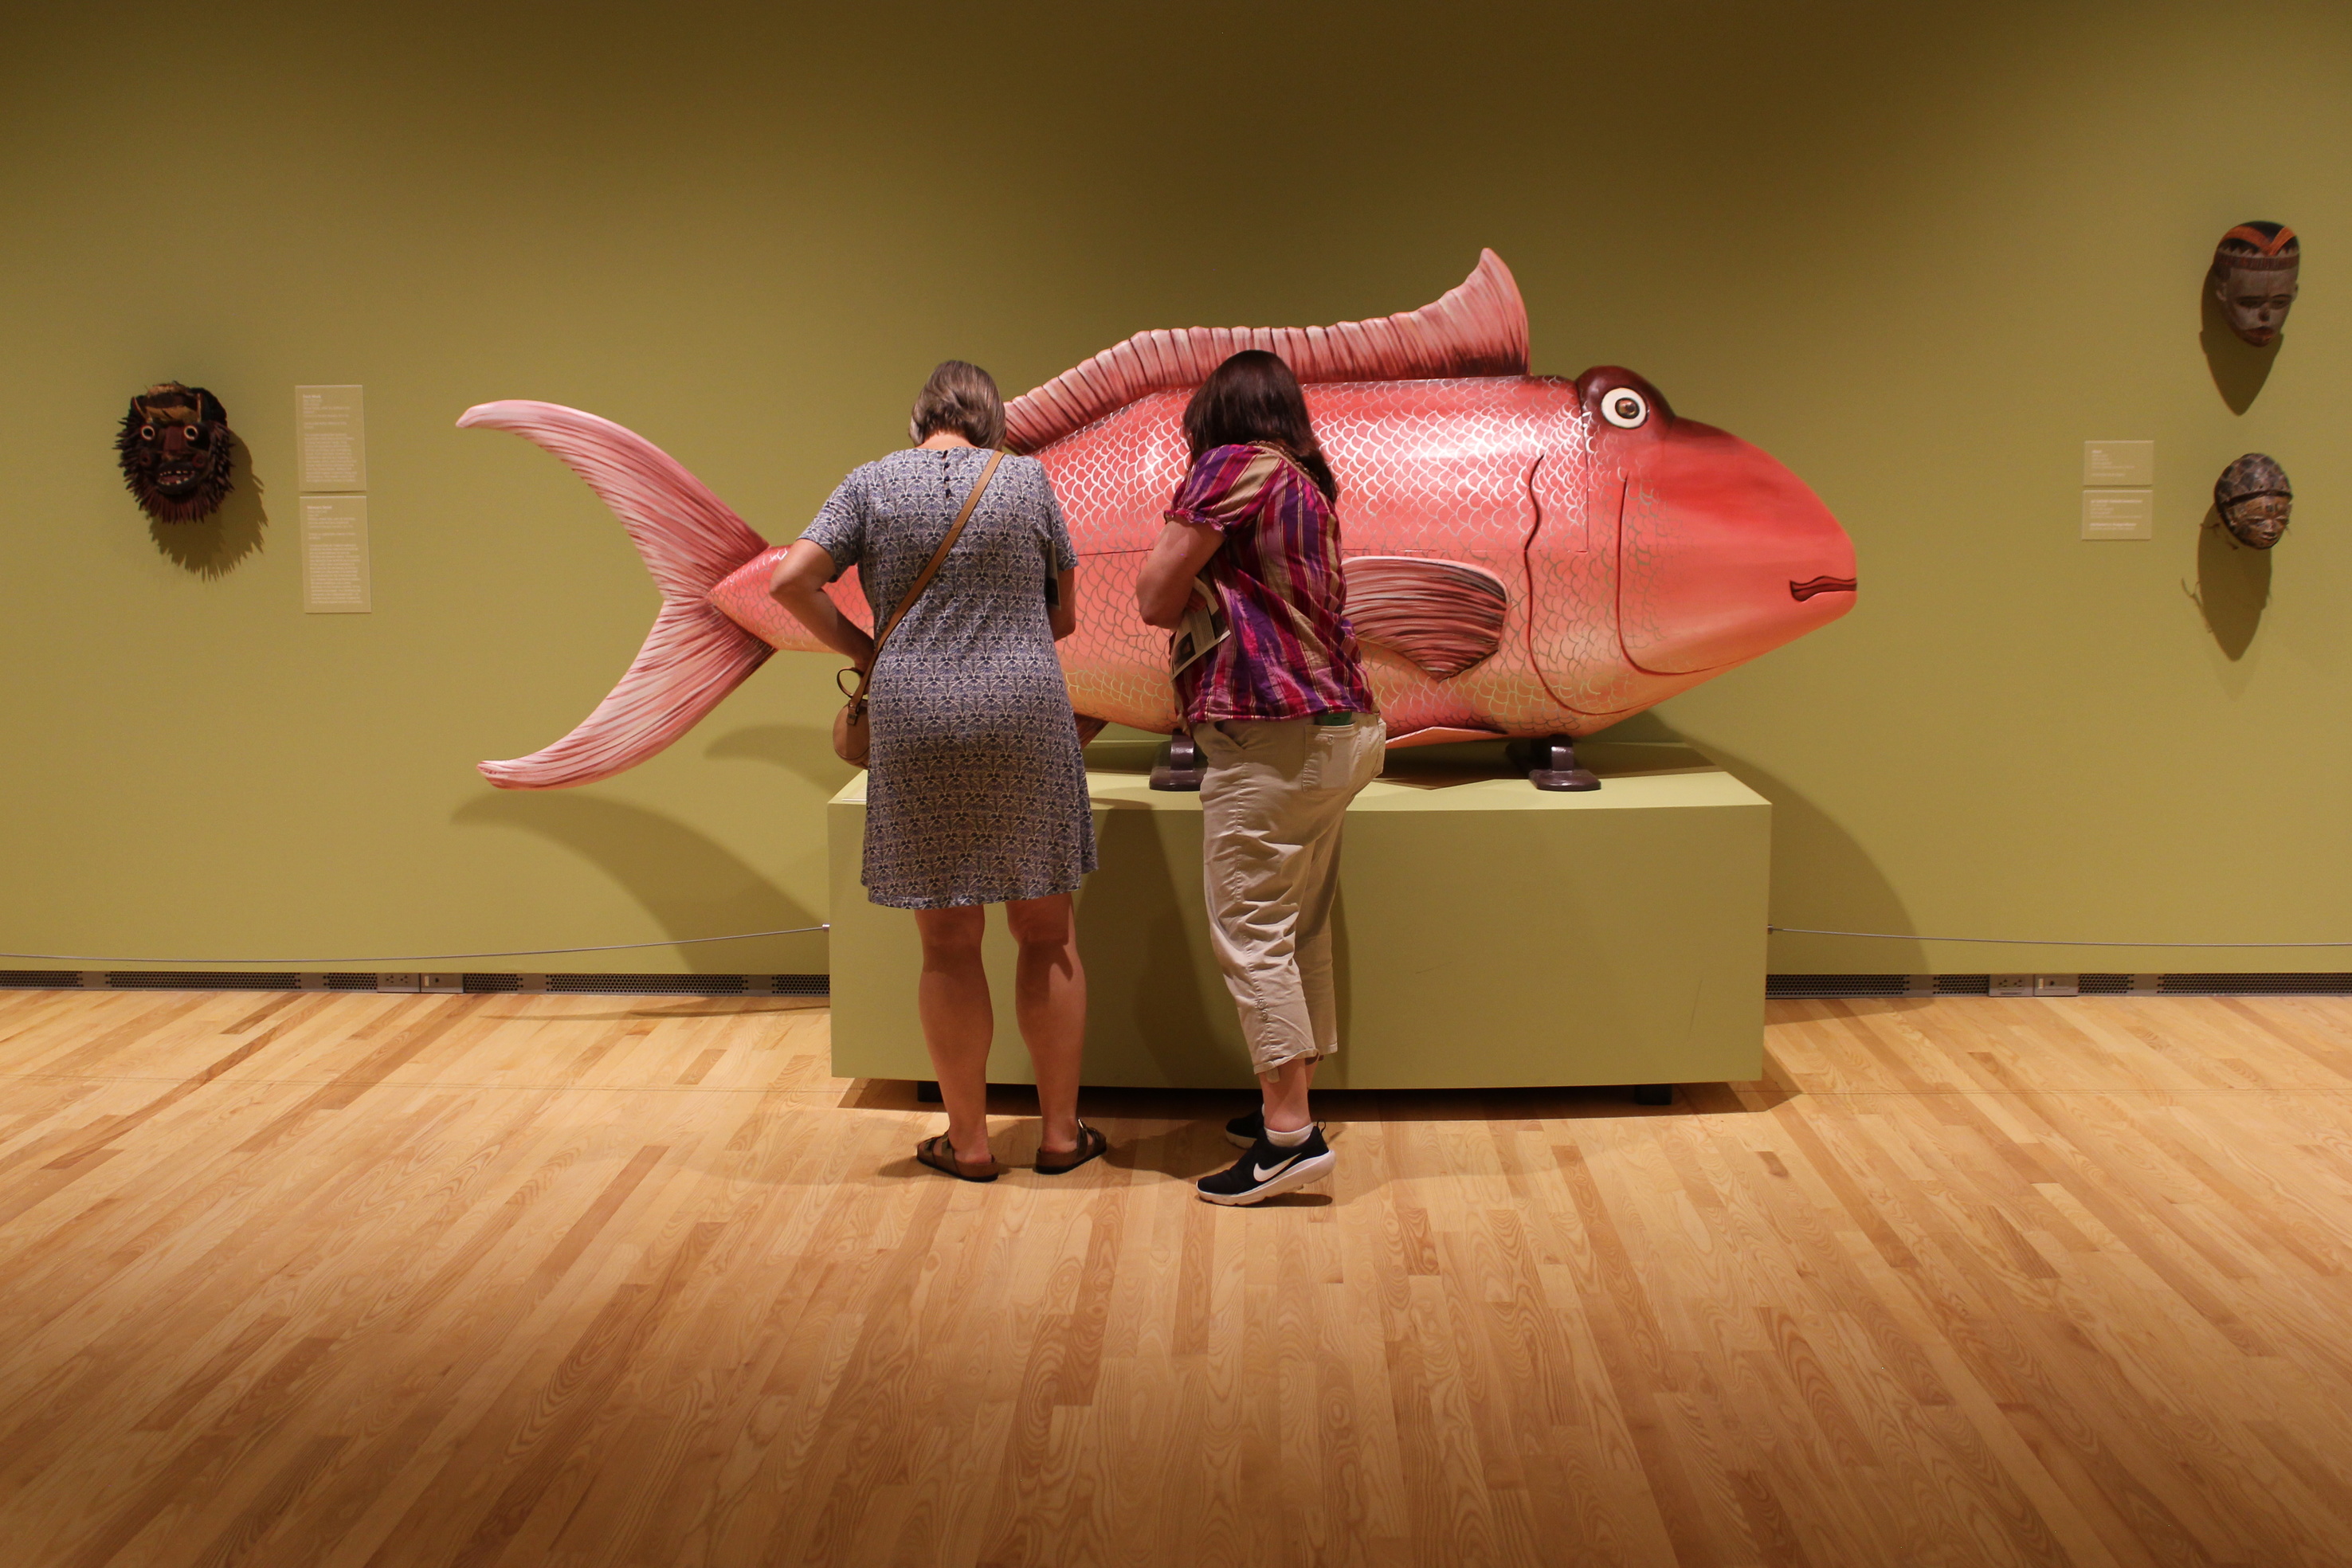 Two women stand in front of a large, pink fish sculpture.